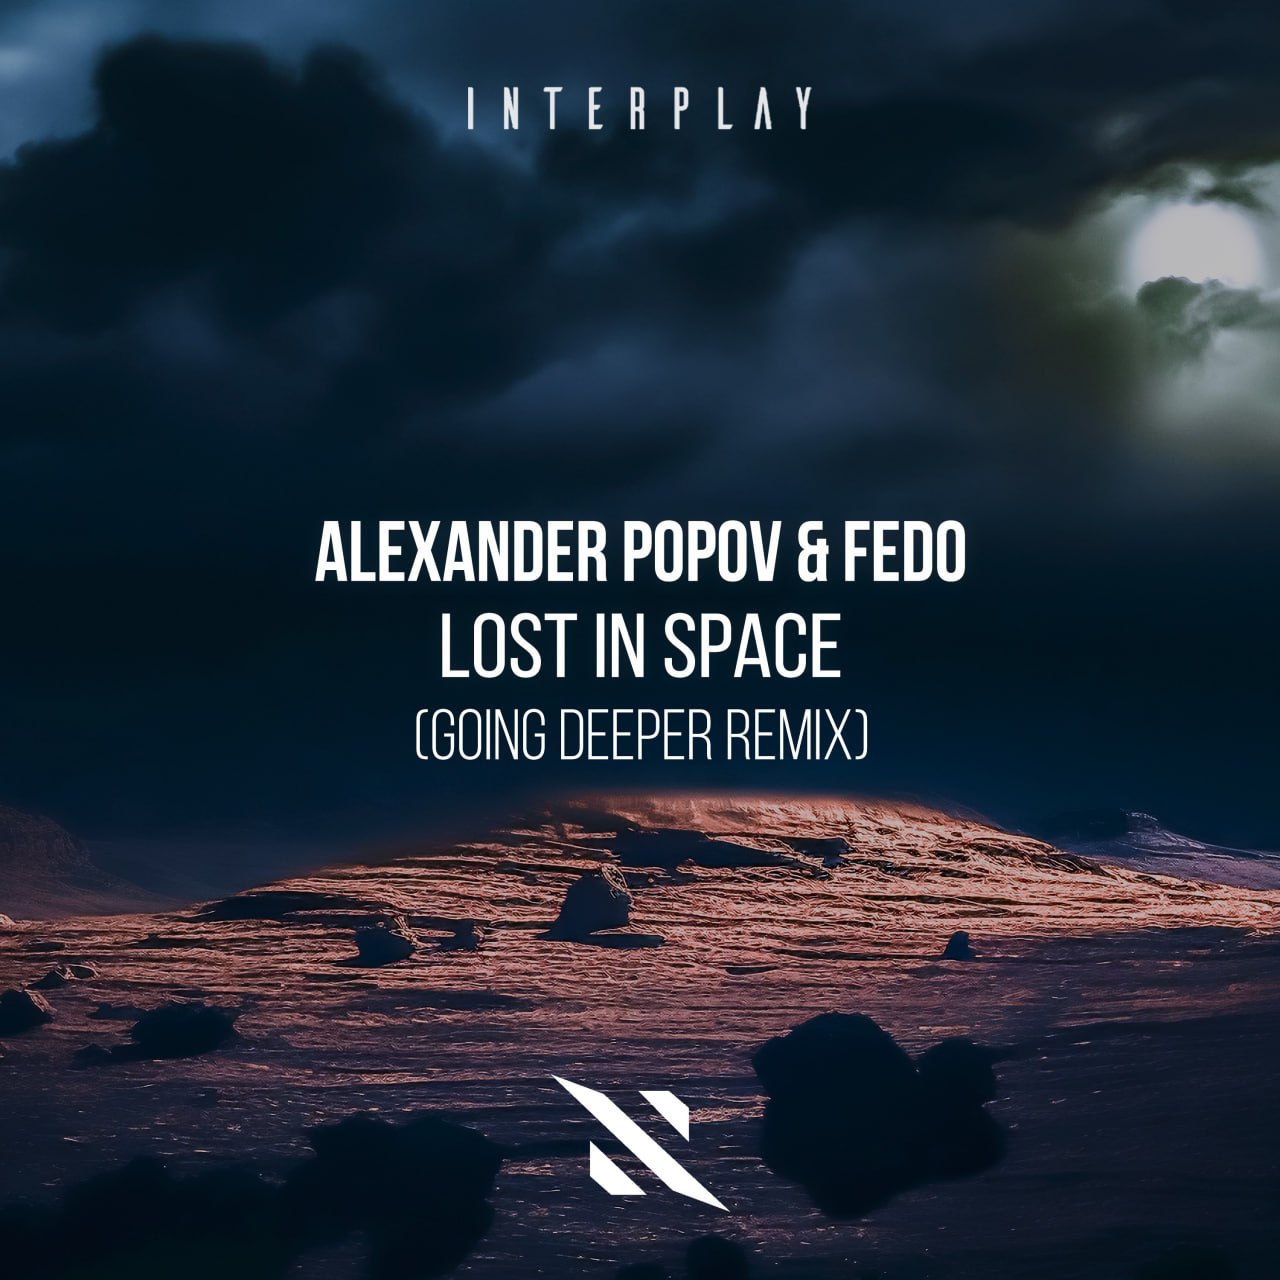 Alexander Popov & Fedo - Lost In Space (Going Deeper Extended Remix)